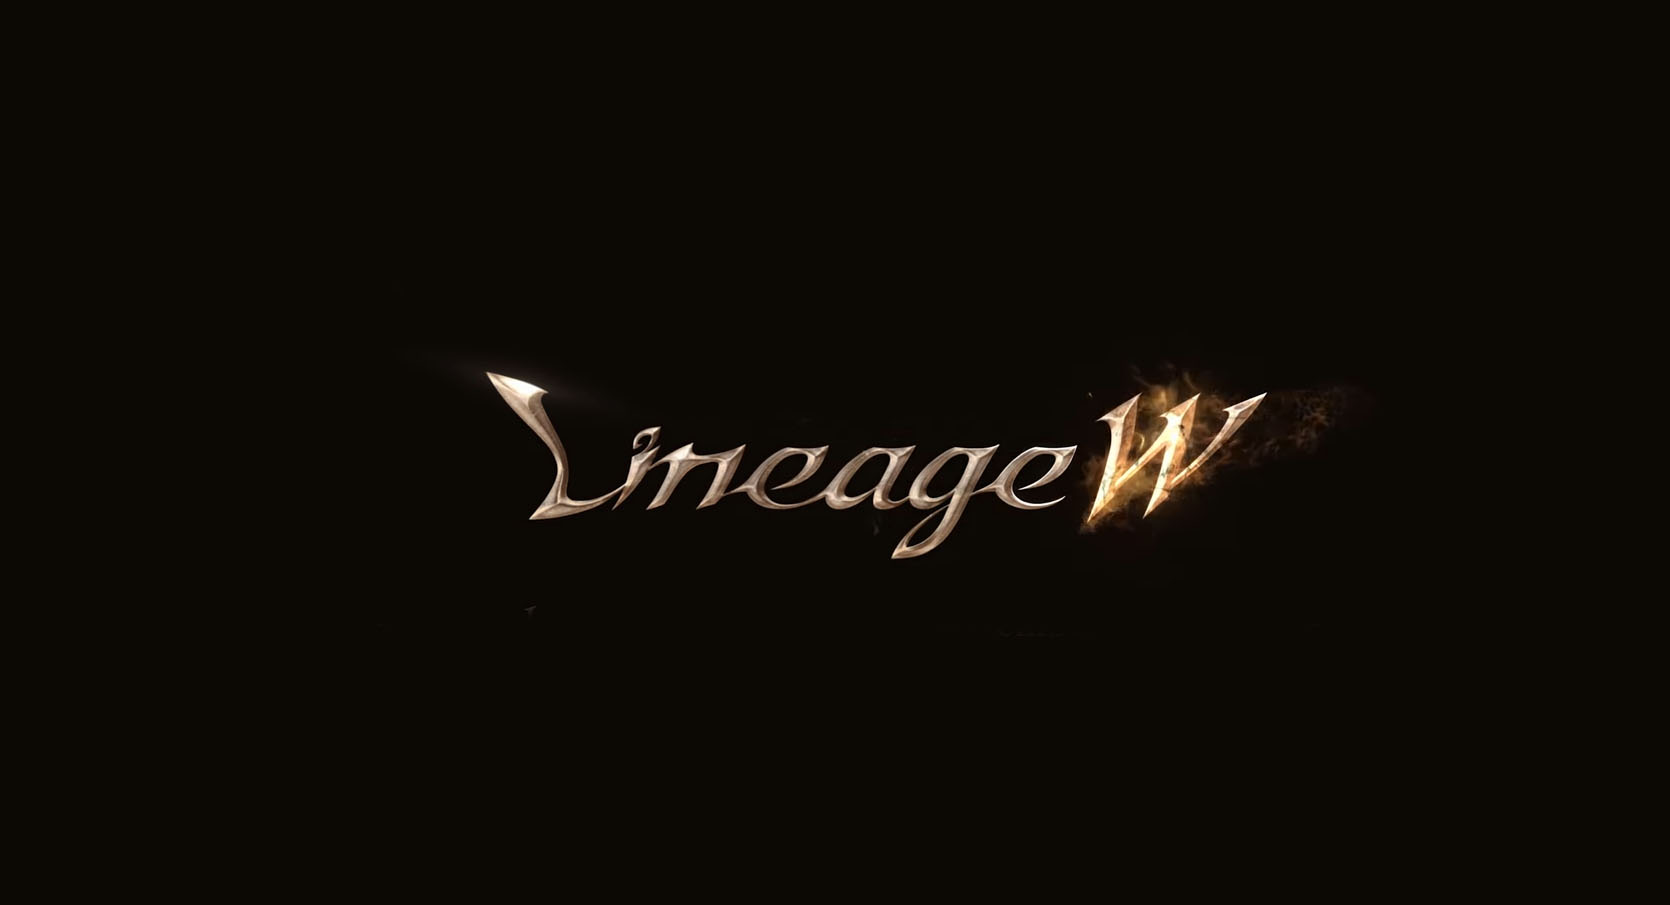 Full version of Android Fantasy game apk Lineage W for tablet and phone.